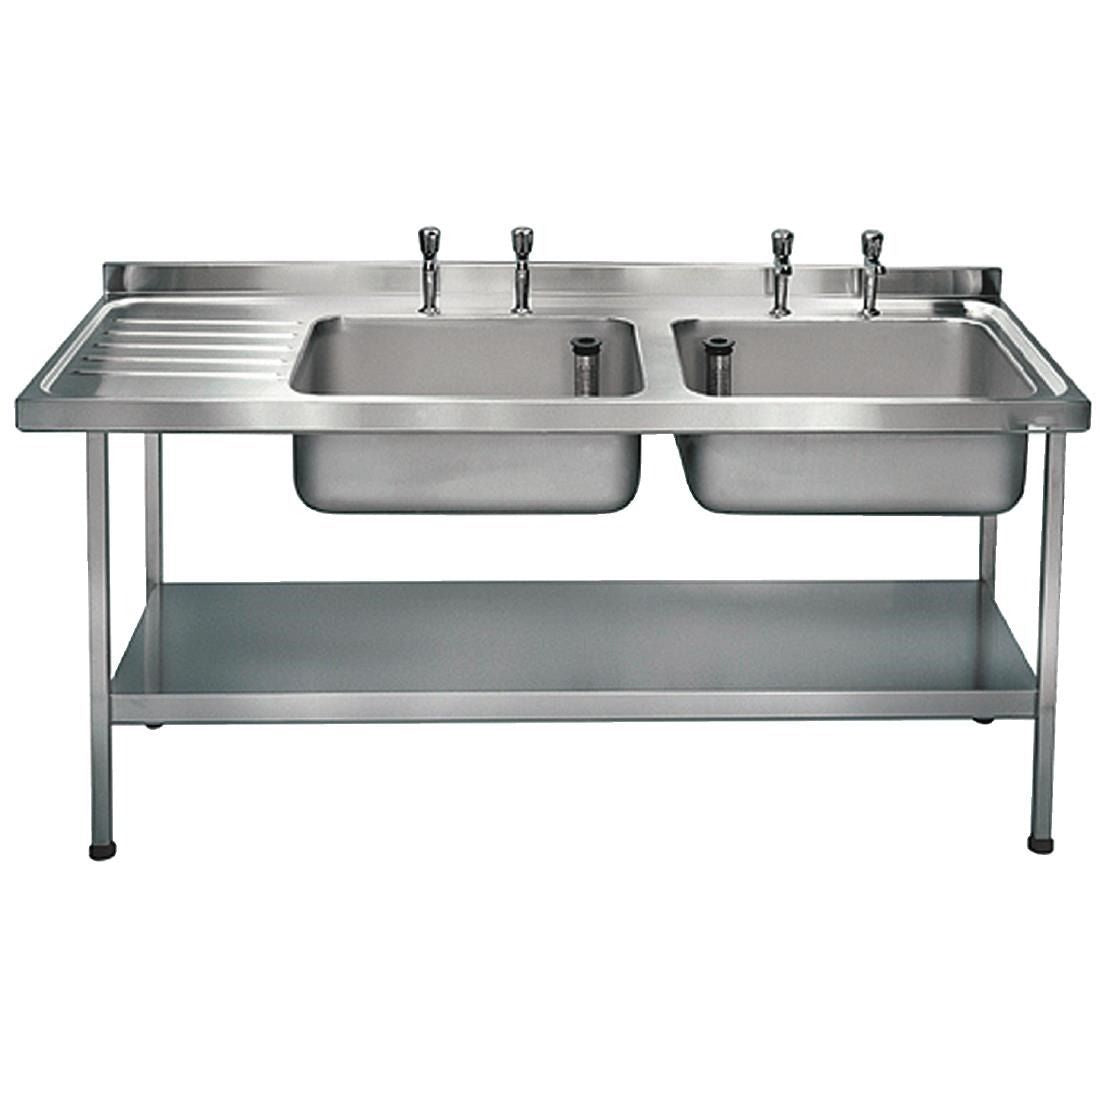 Franke Stainless Steel Double Bowl Sink Left Hand Drainer - P372